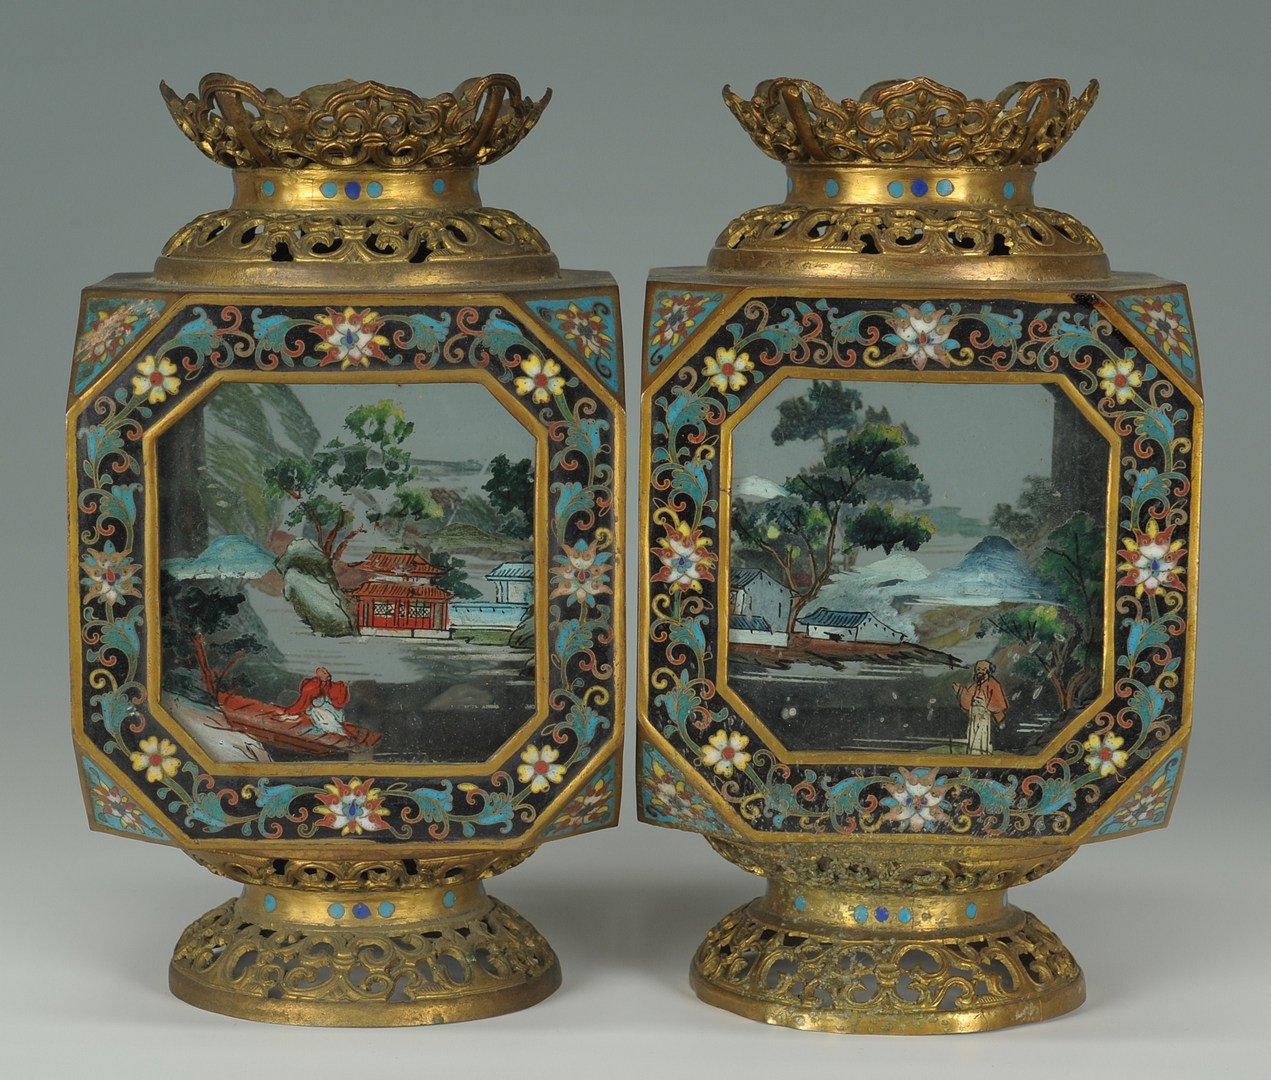 Lot 18: Pair Chinese Cloisonne Painted Table Lanterns